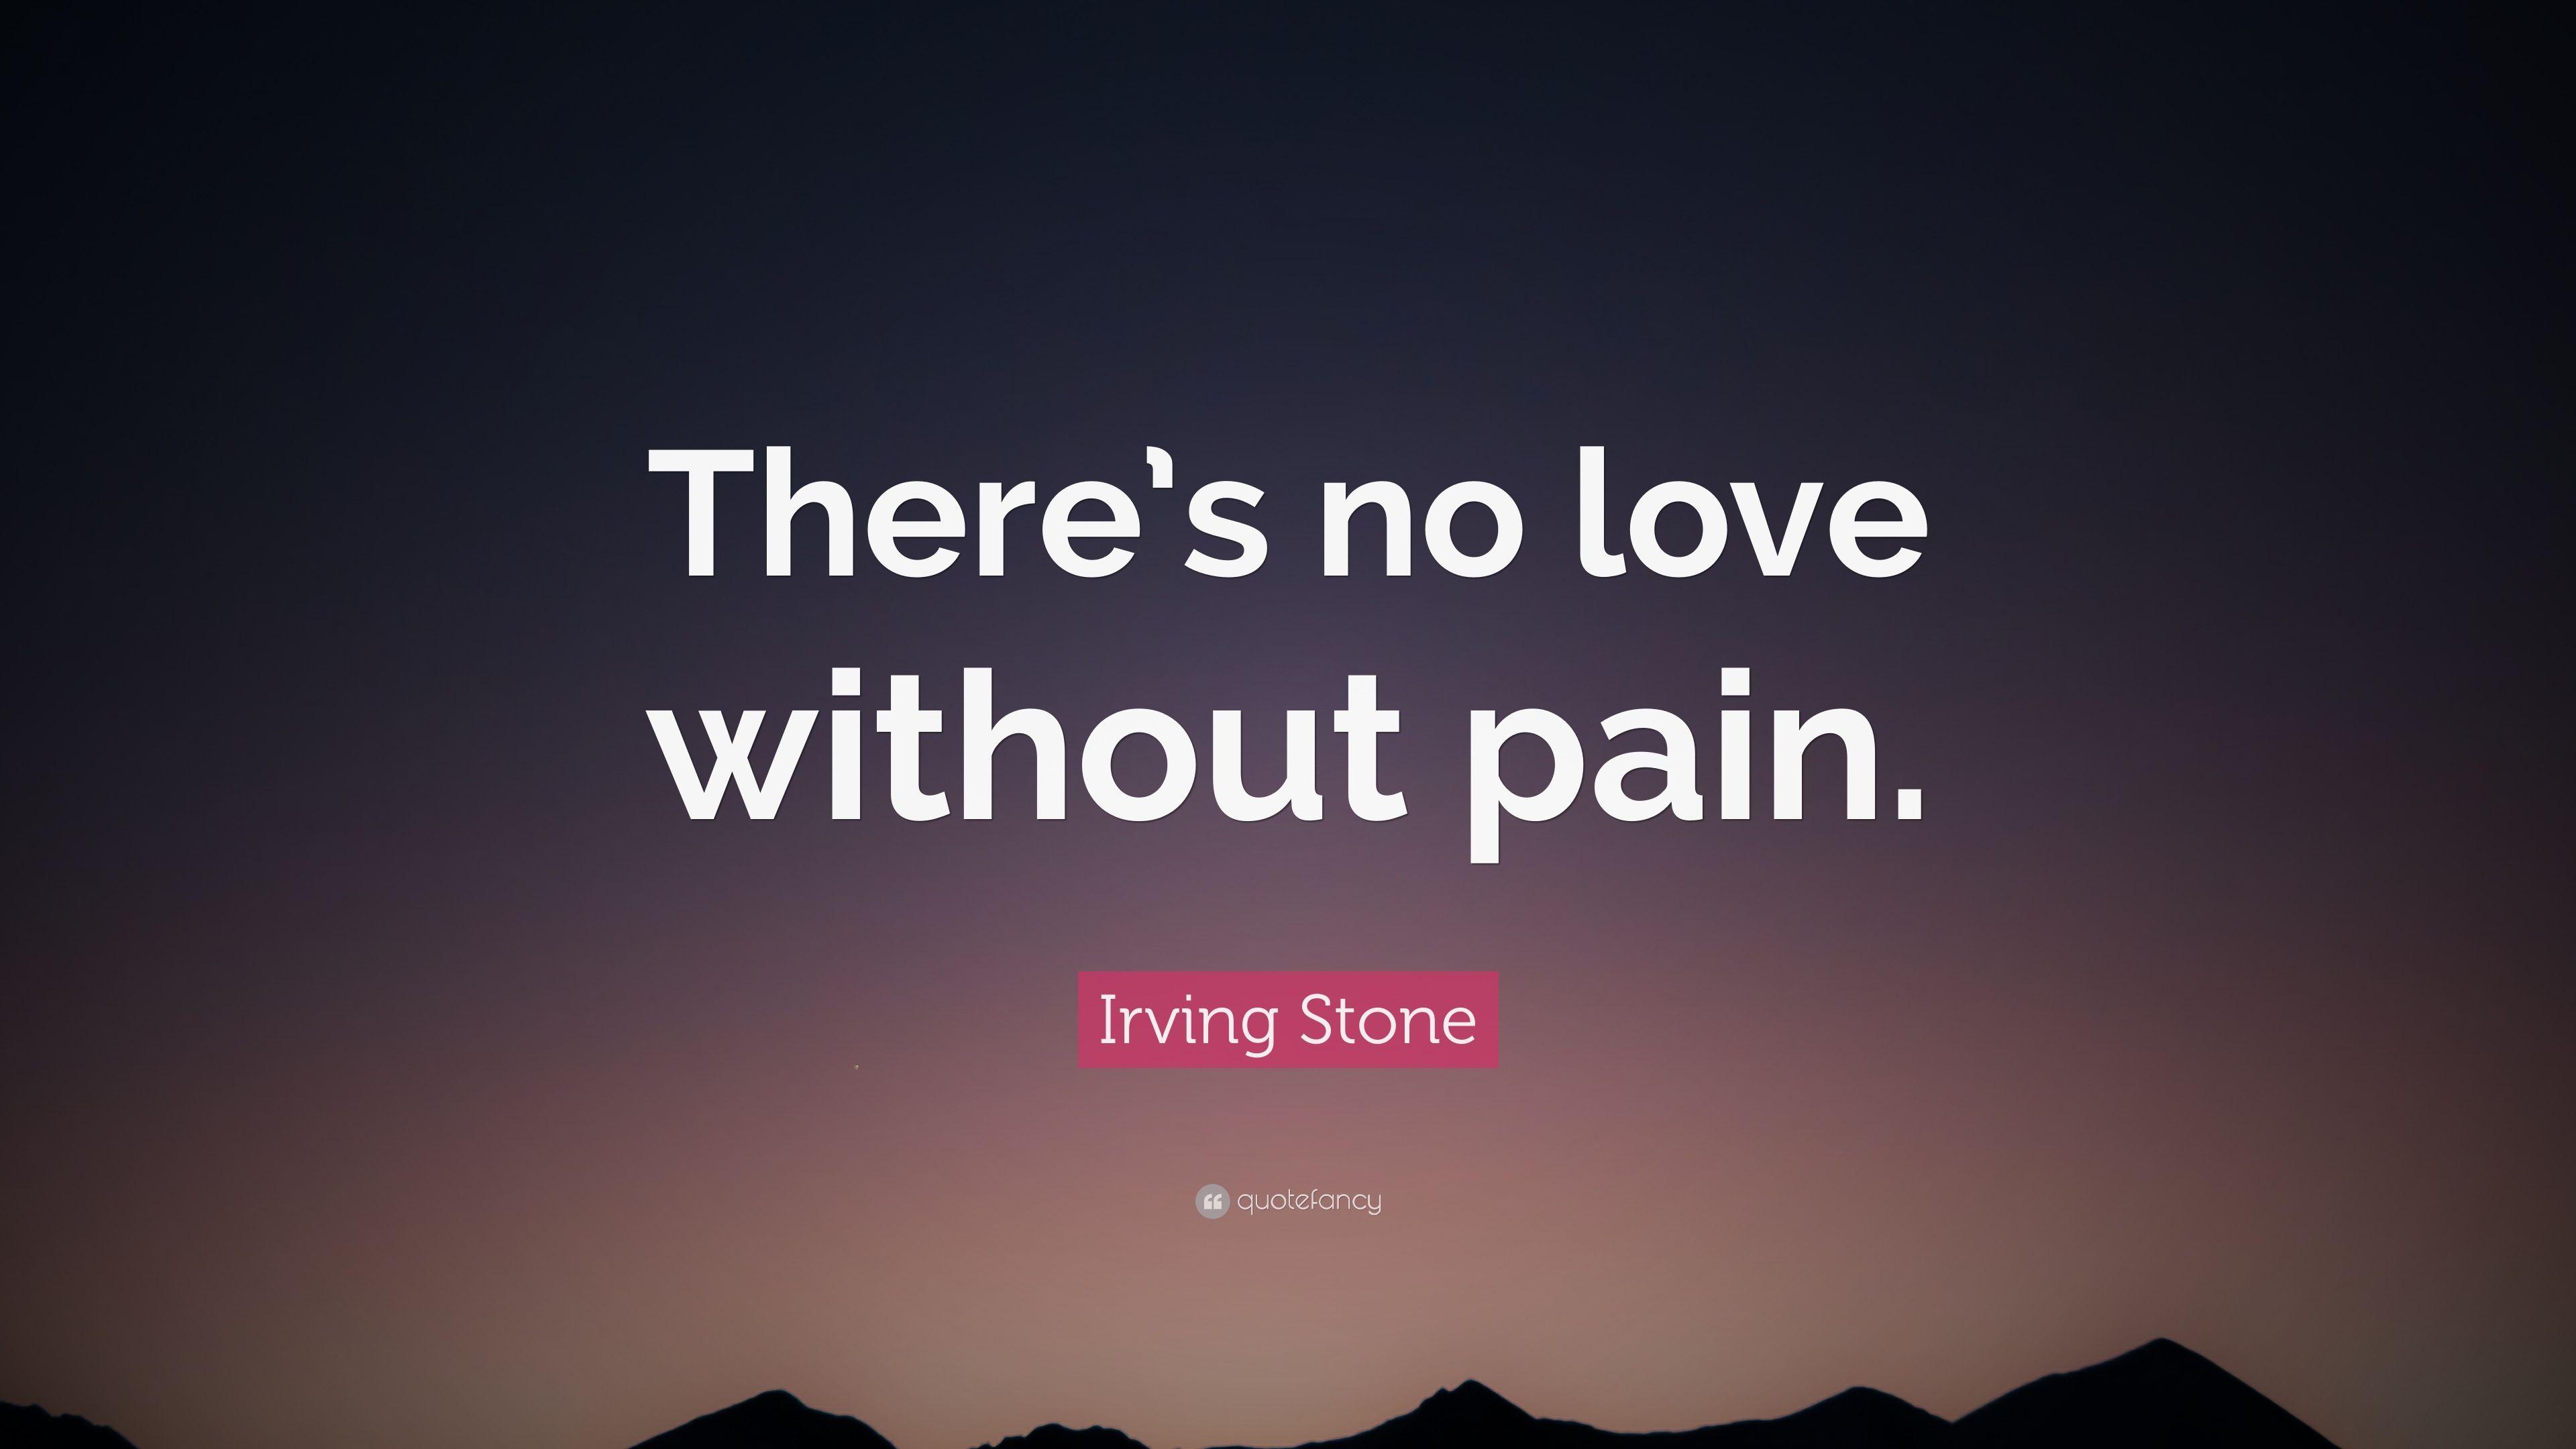 Irving Stone Quote: “There's no love without pain.” 10 wallpaper